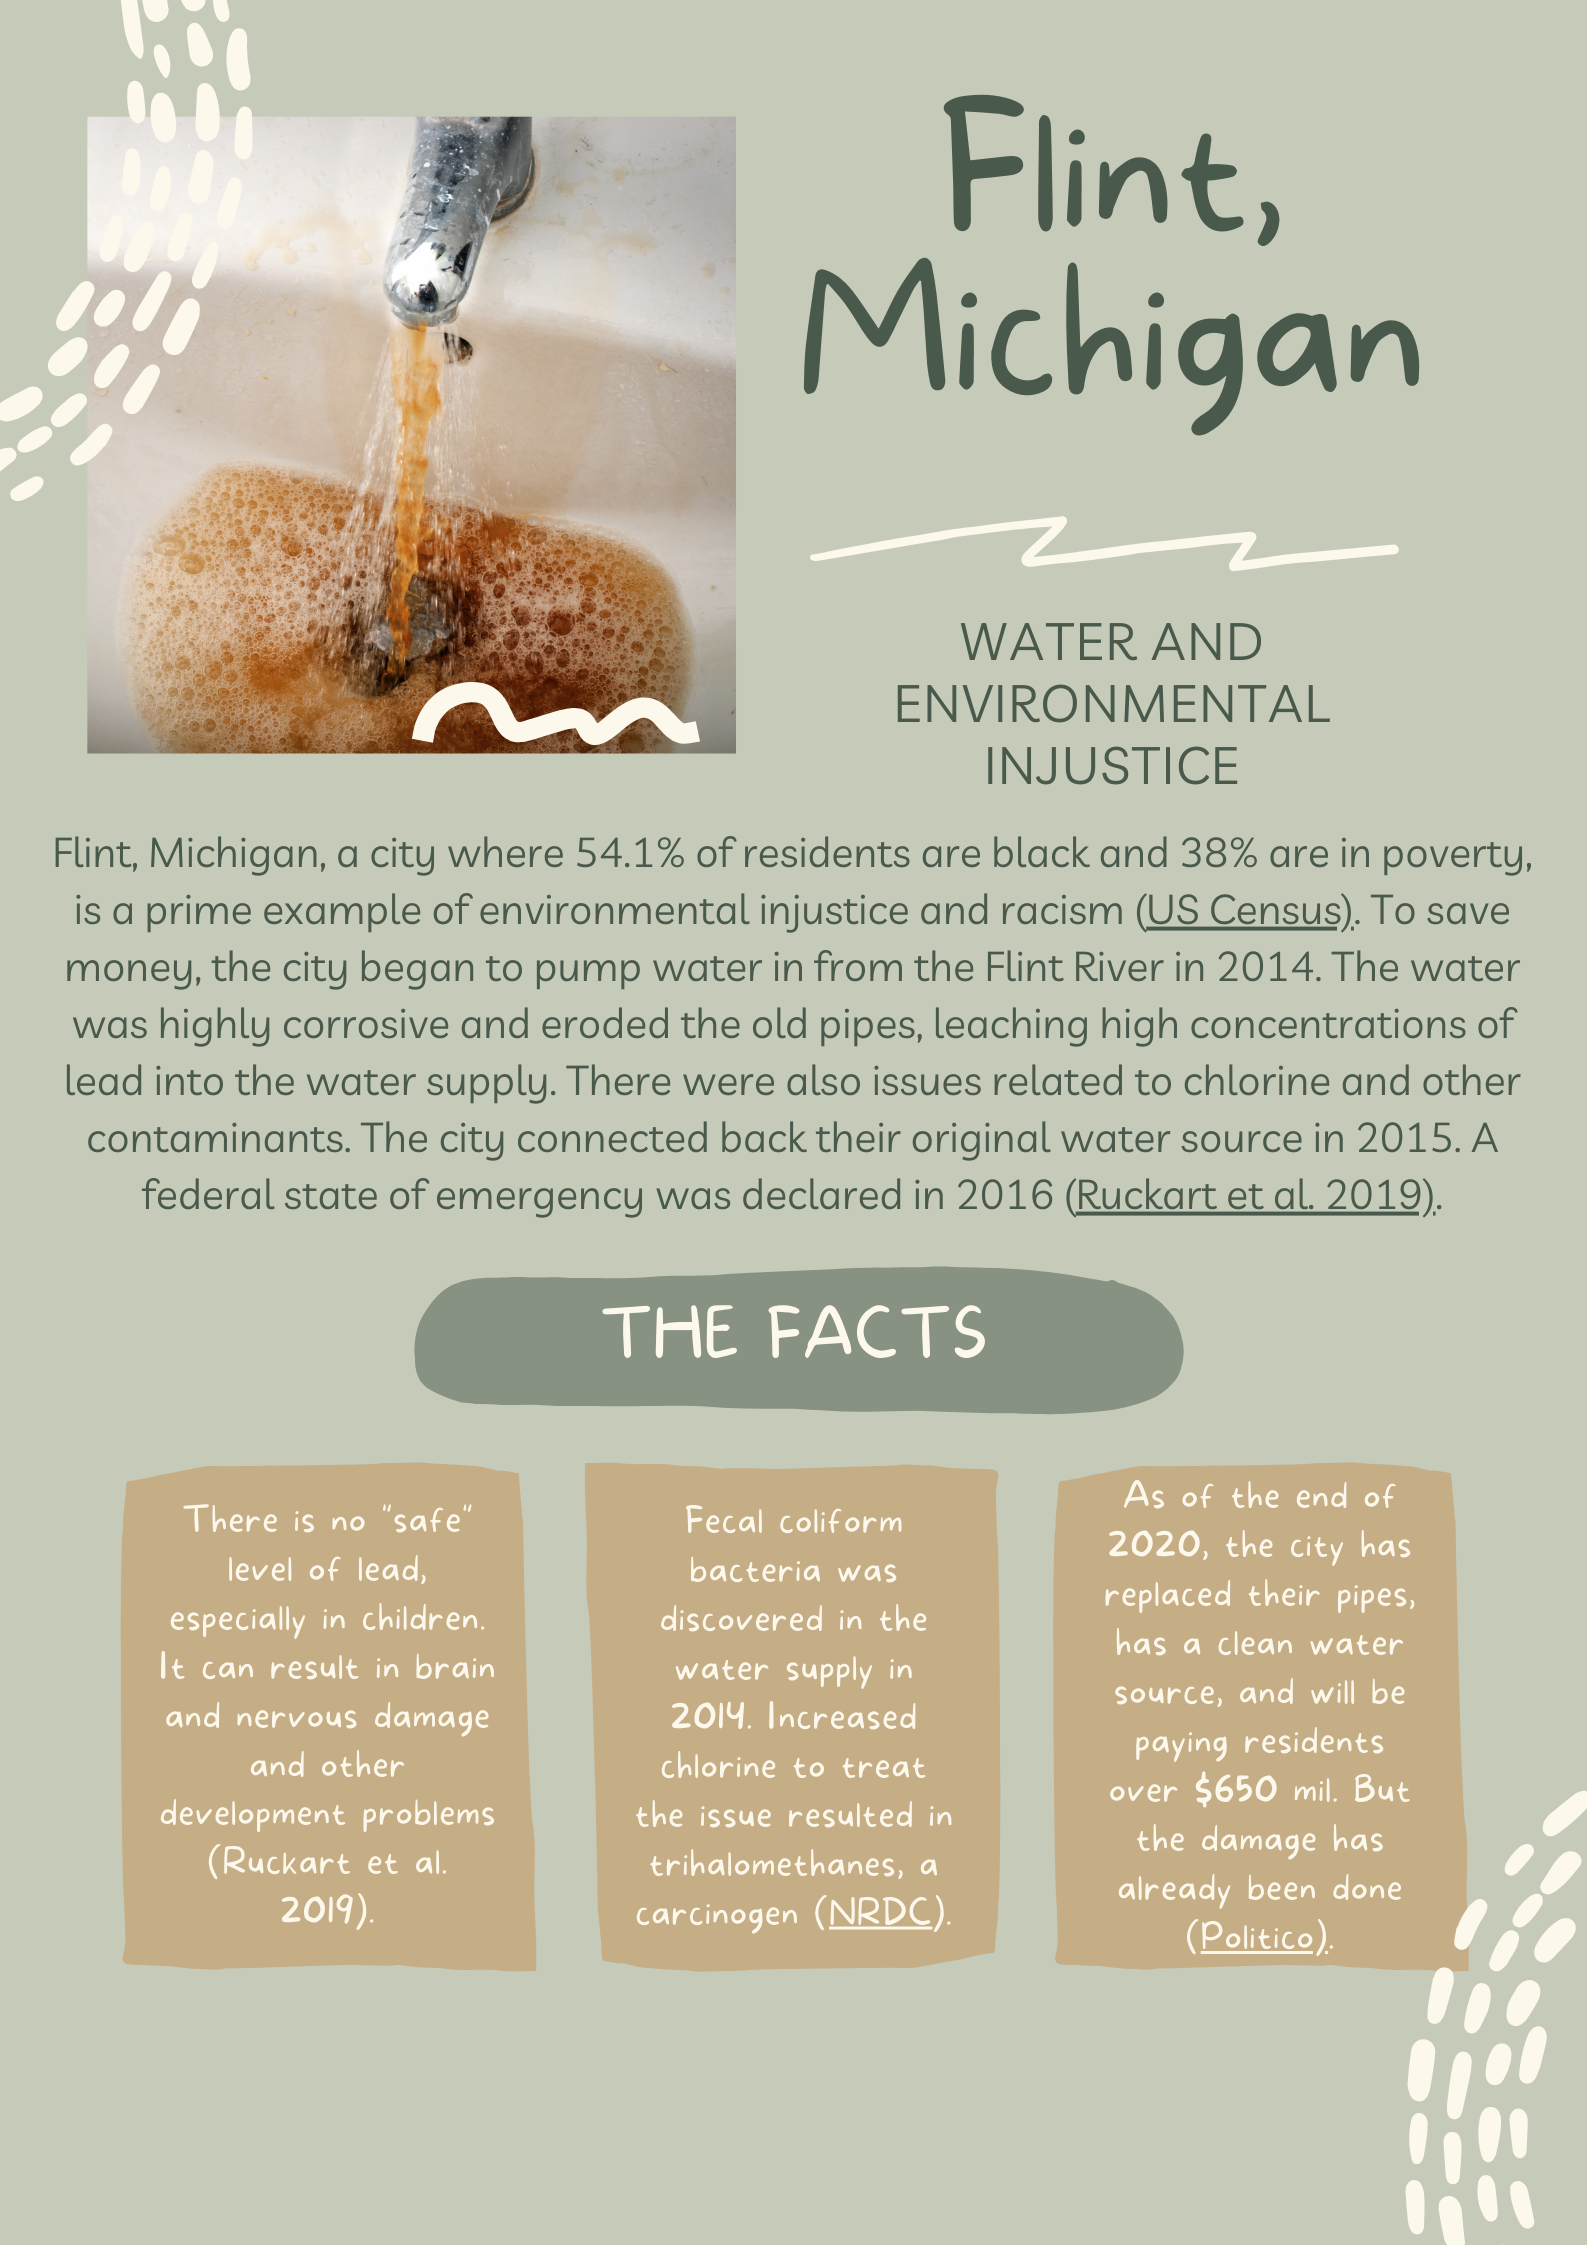 Flint, Michigan, a city where 54.1% of residents are black and 38% are in poverty, is a prime example of environmental injustice and racism (US Census). To save money, the city began to pump water in from the Flint River in 2014. The water was highly corrosive and eroded the old pipes, eaching high concentrations of lead into the water supply. There were also issues related to chlorine and other contaminants. The city connected back their original water source in 2015. A federal state of emergency was declared in 2016 (Rukart et al. 2019).